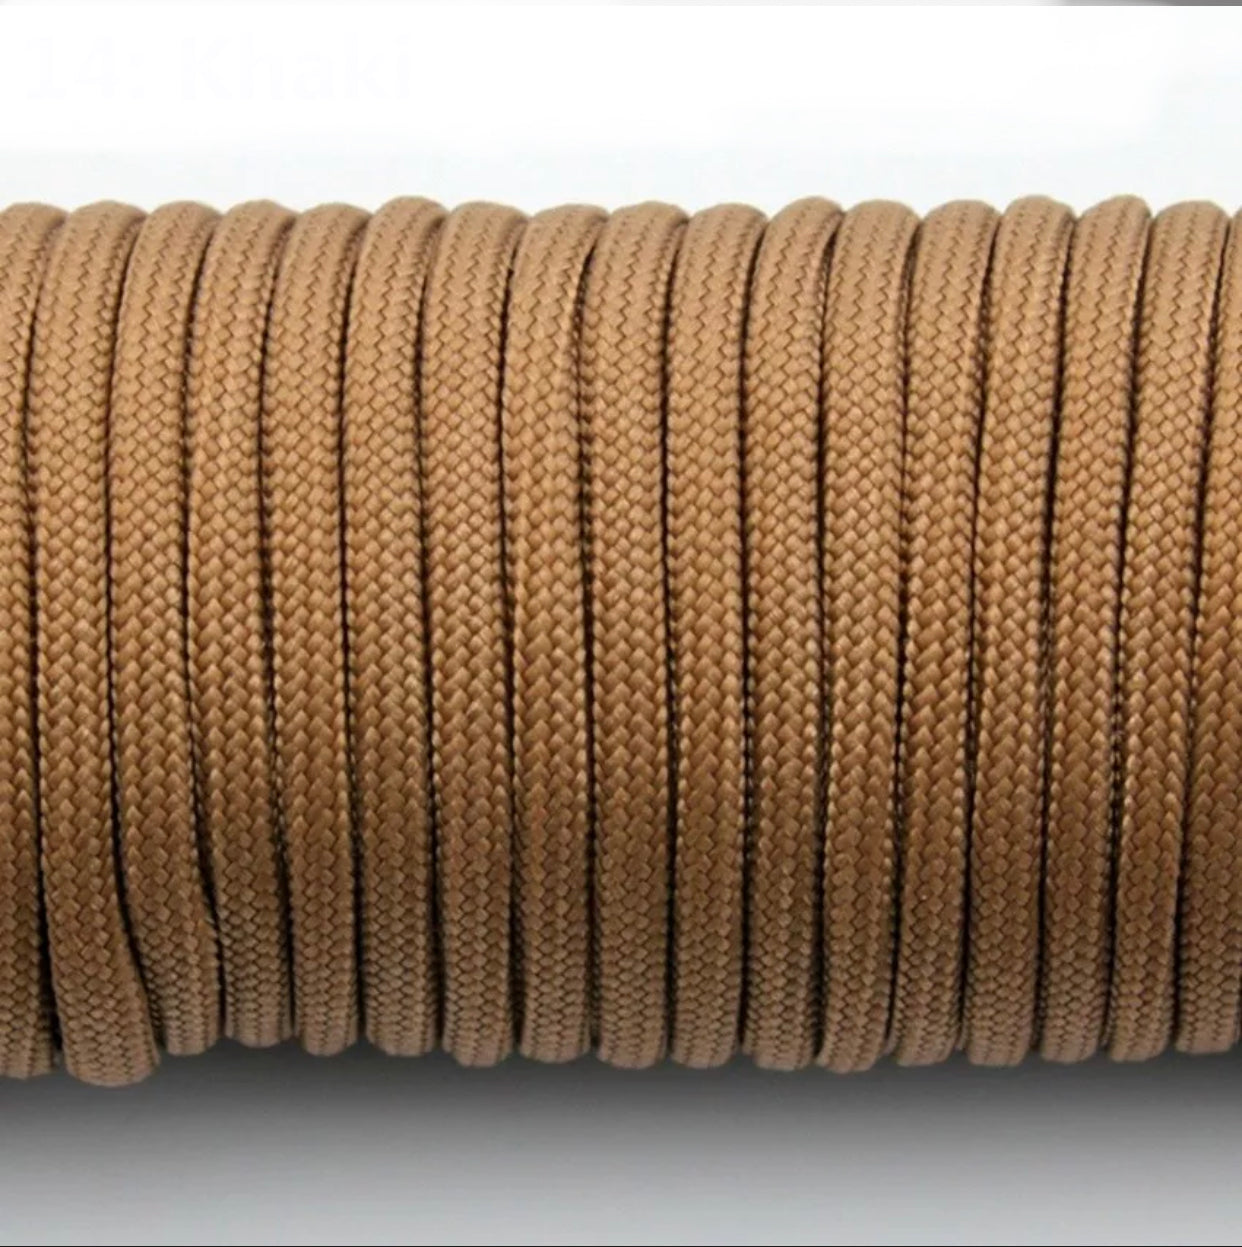 Brown Paracord